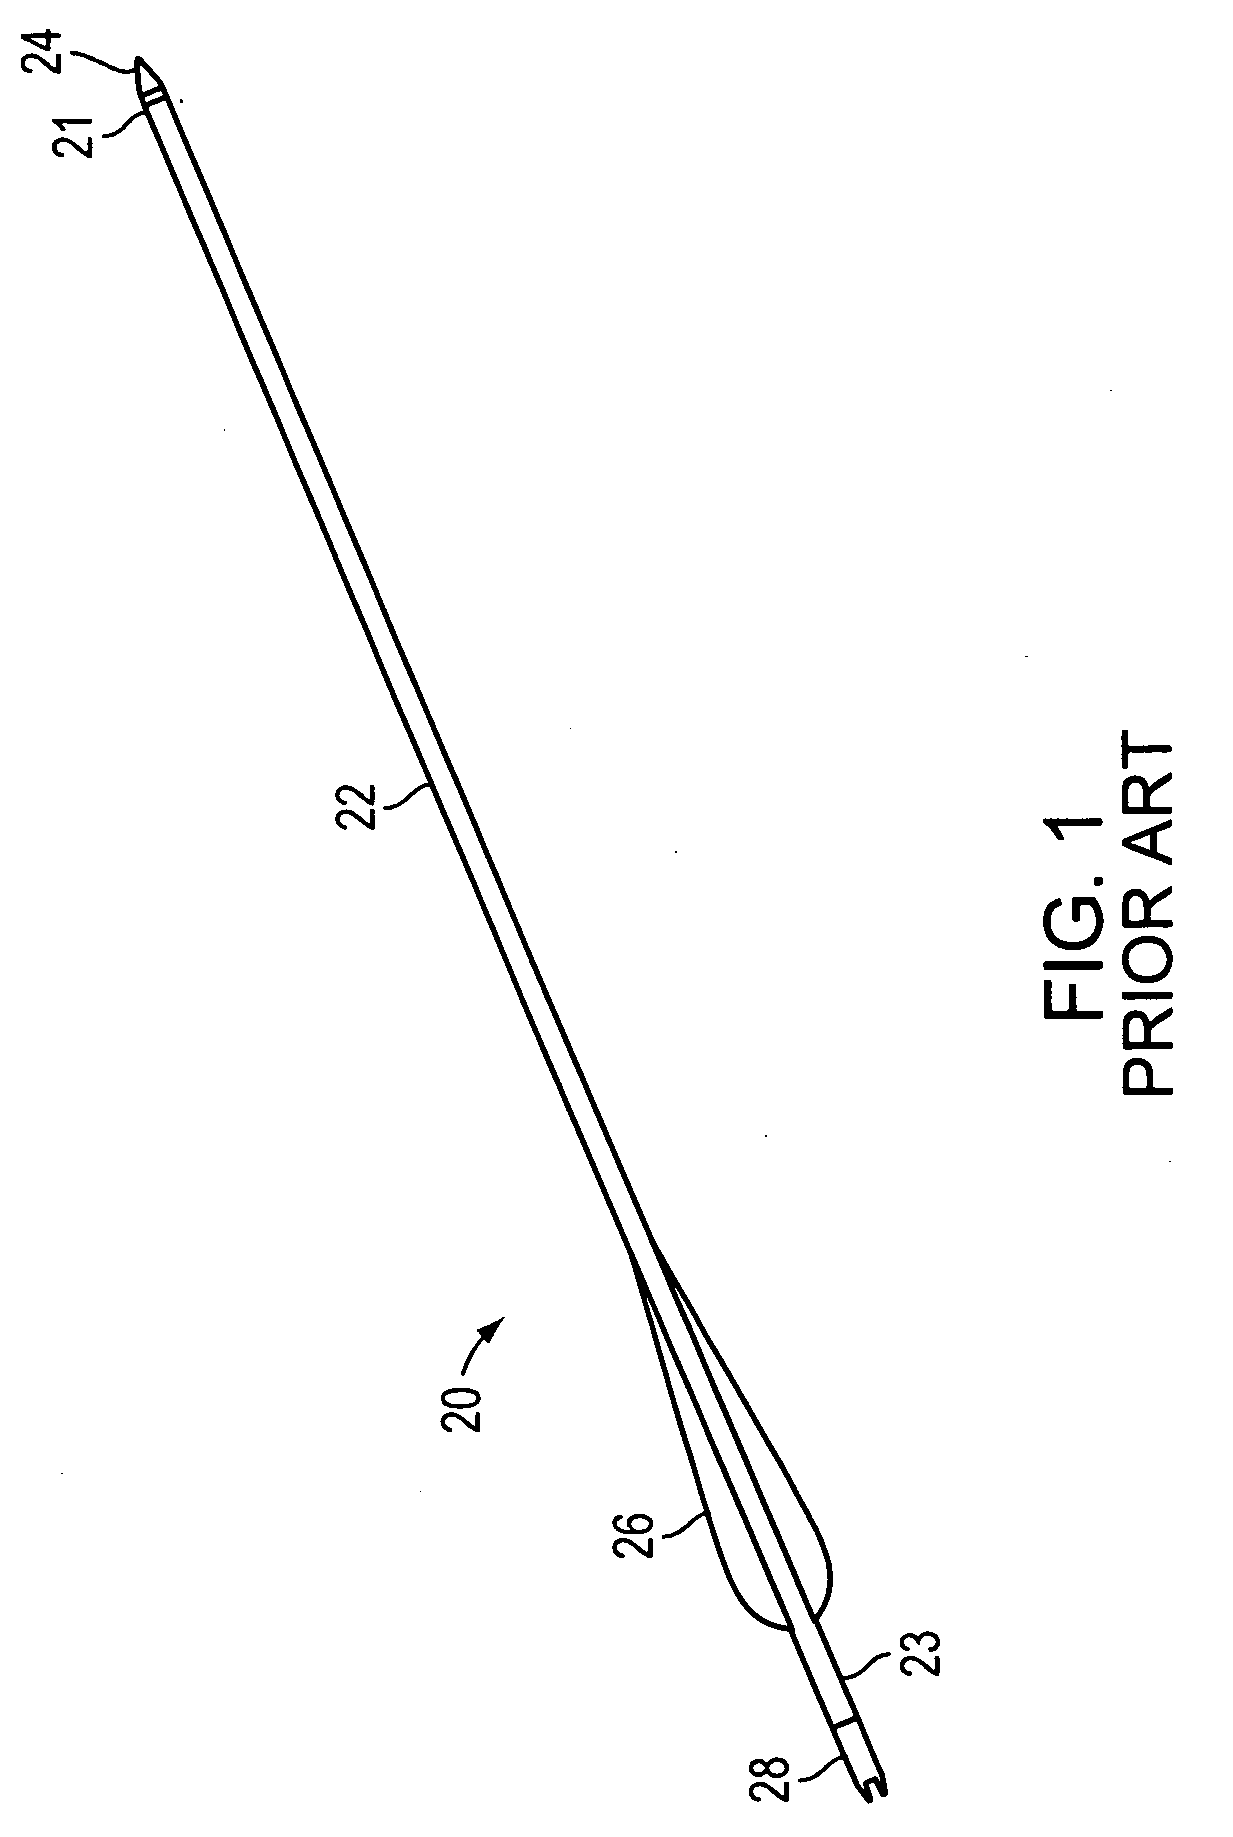 Apparatus, system and method for archery equipment